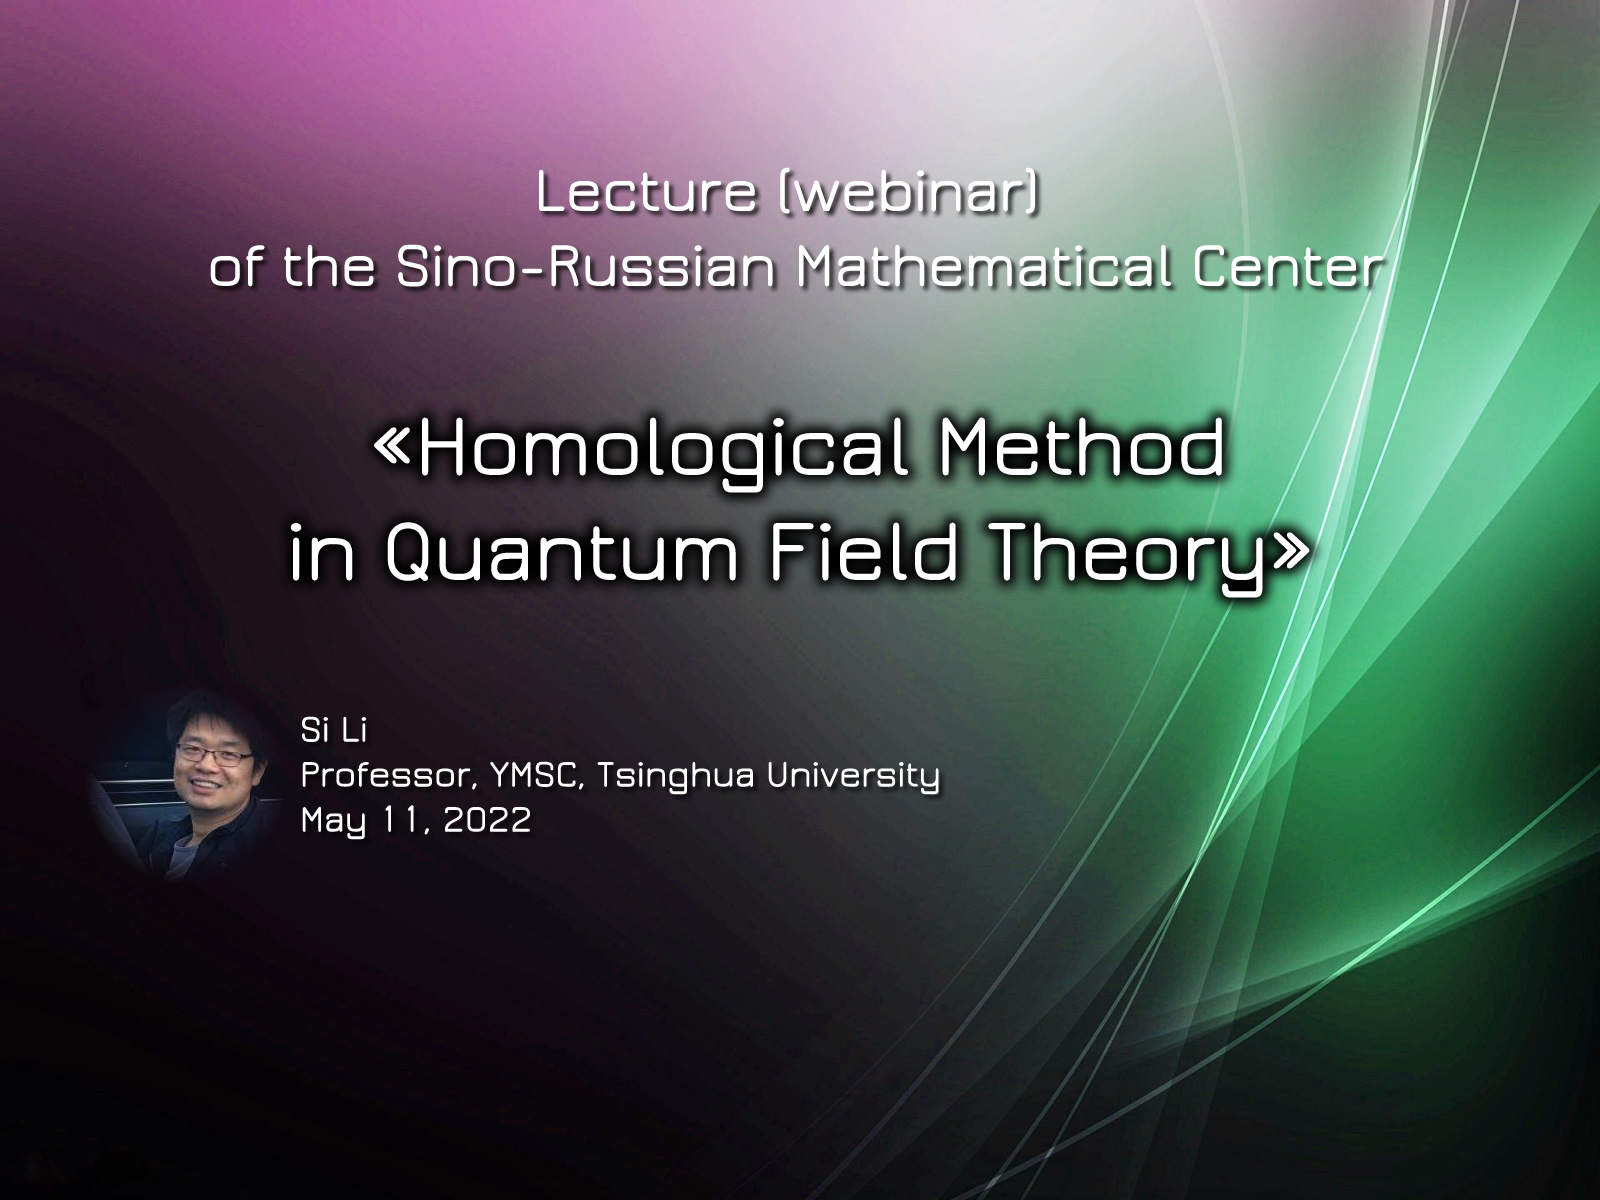 «Homological Method in Quantum Field Theory» 11.05.2022